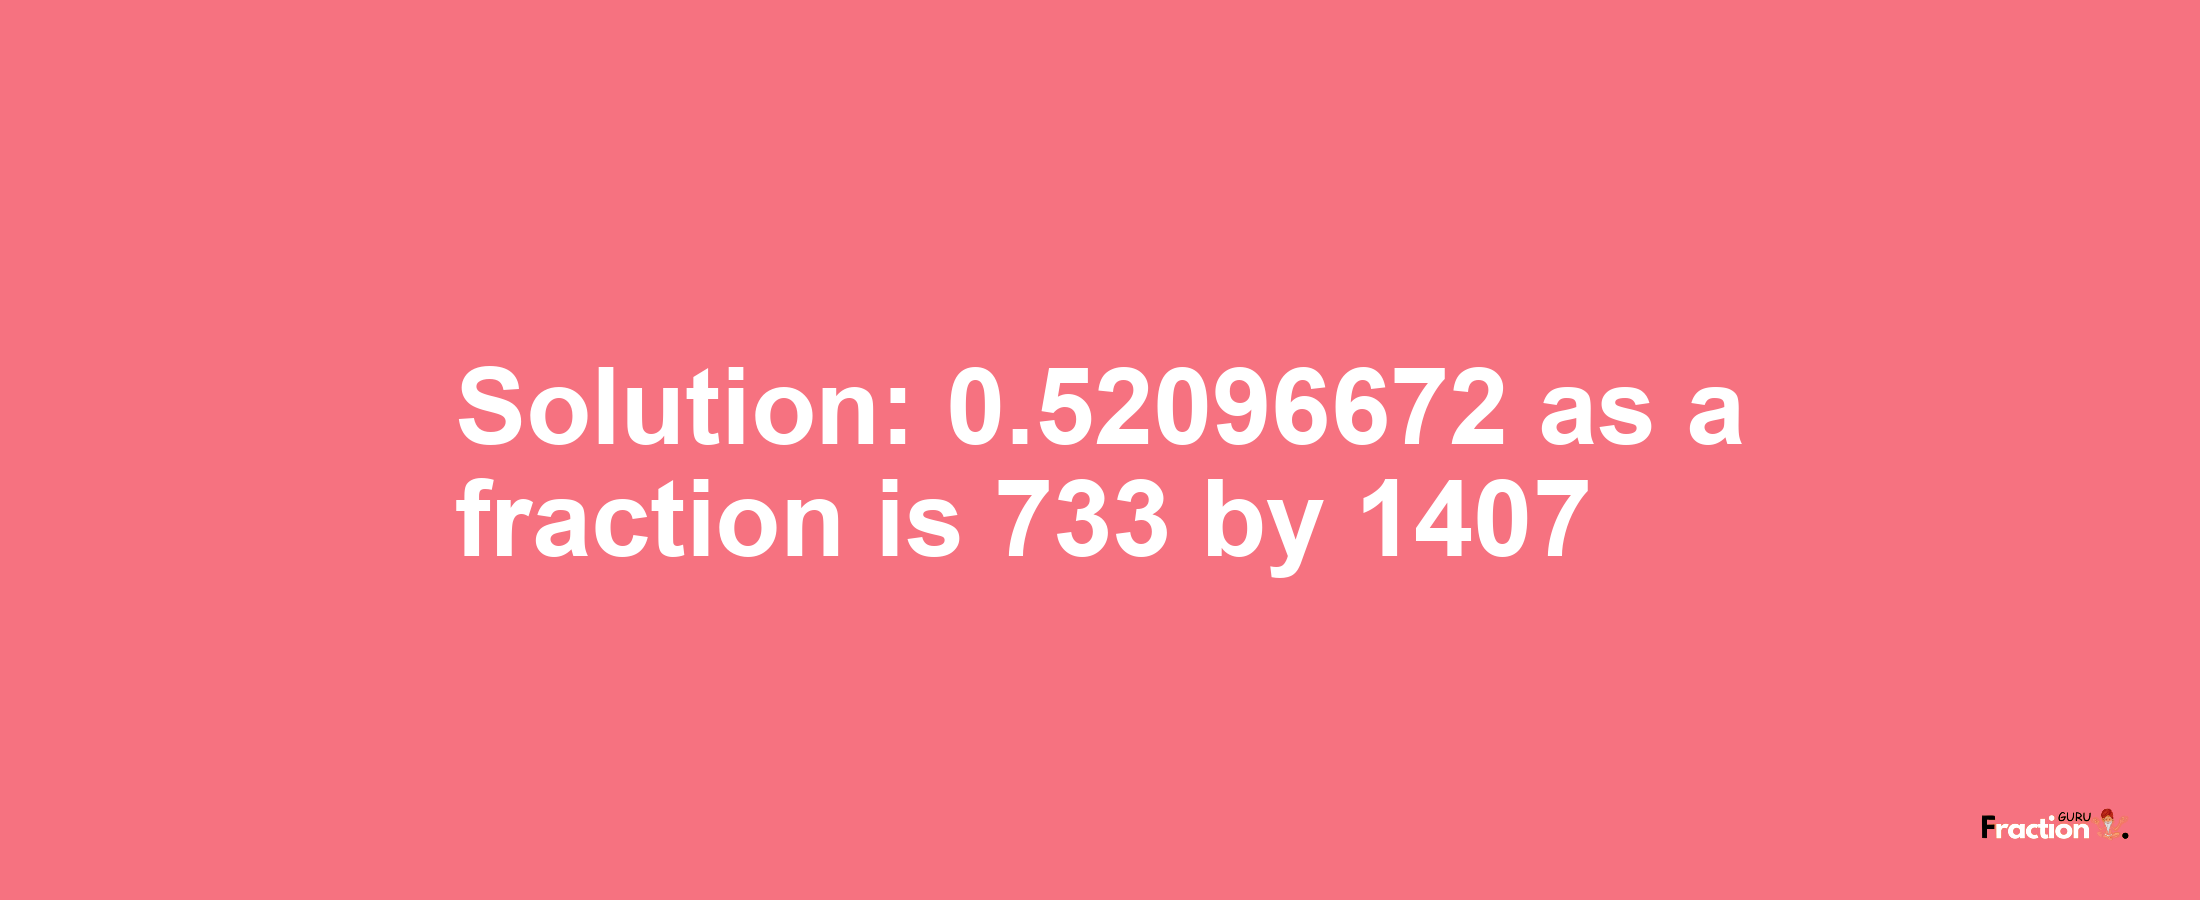 Solution:0.52096672 as a fraction is 733/1407